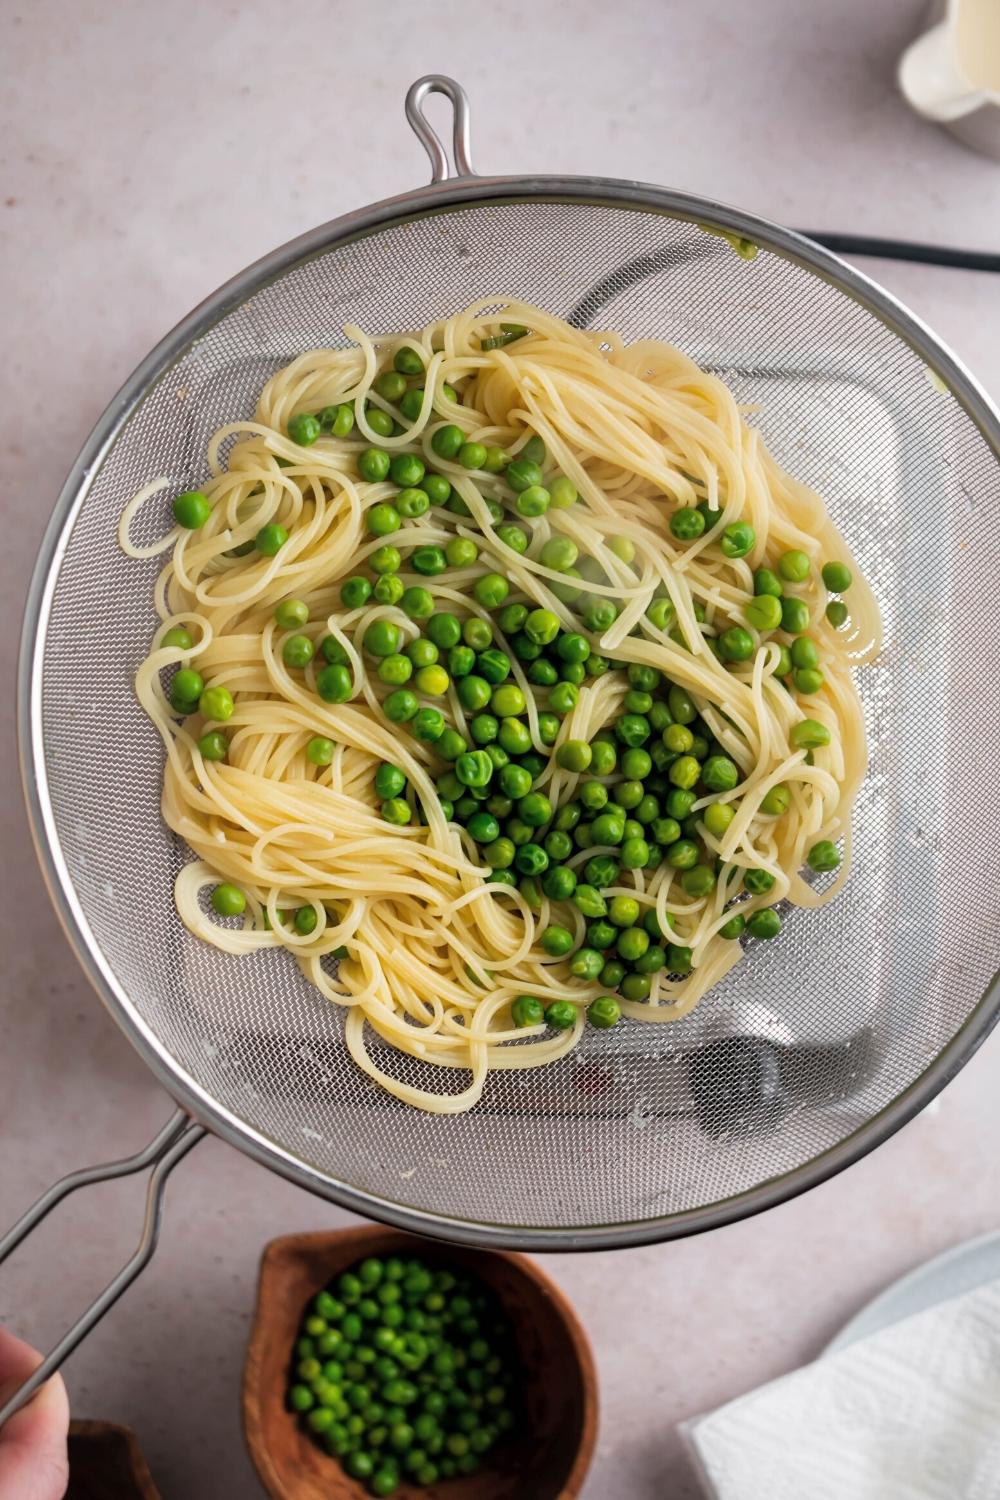 Cooked spaghetti and peas in a strainer.